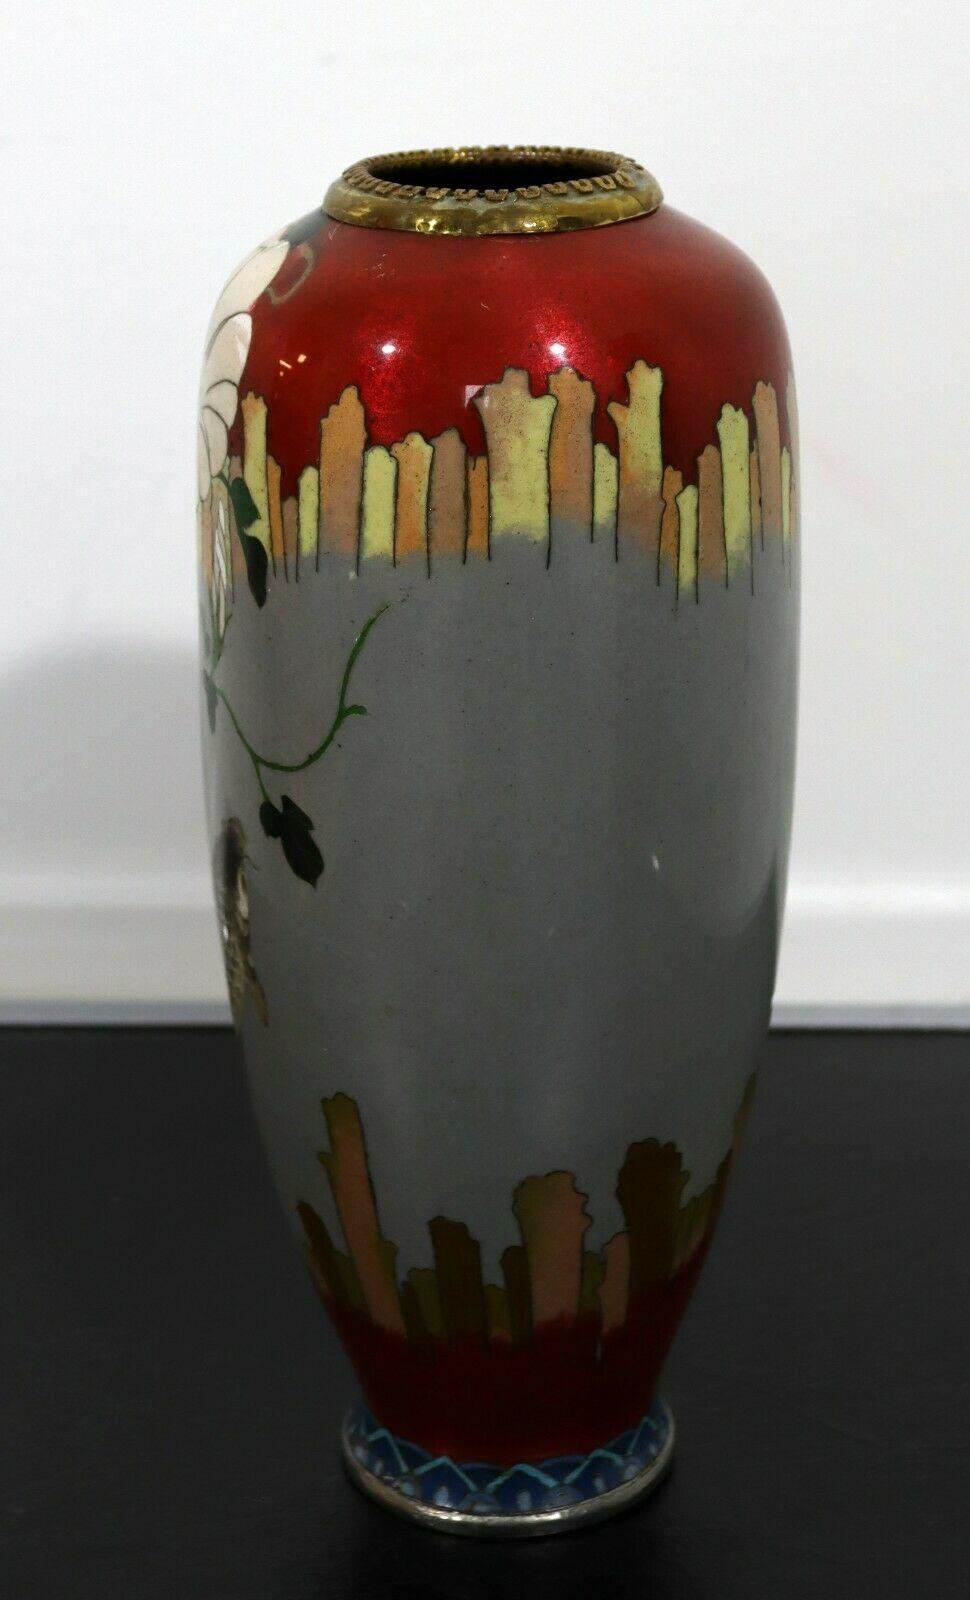 A stunning vintage vase that is made with enameled cloisonne. The design is depicting a lovely koi fish imagery. In excellent condition. Dimensions: 11